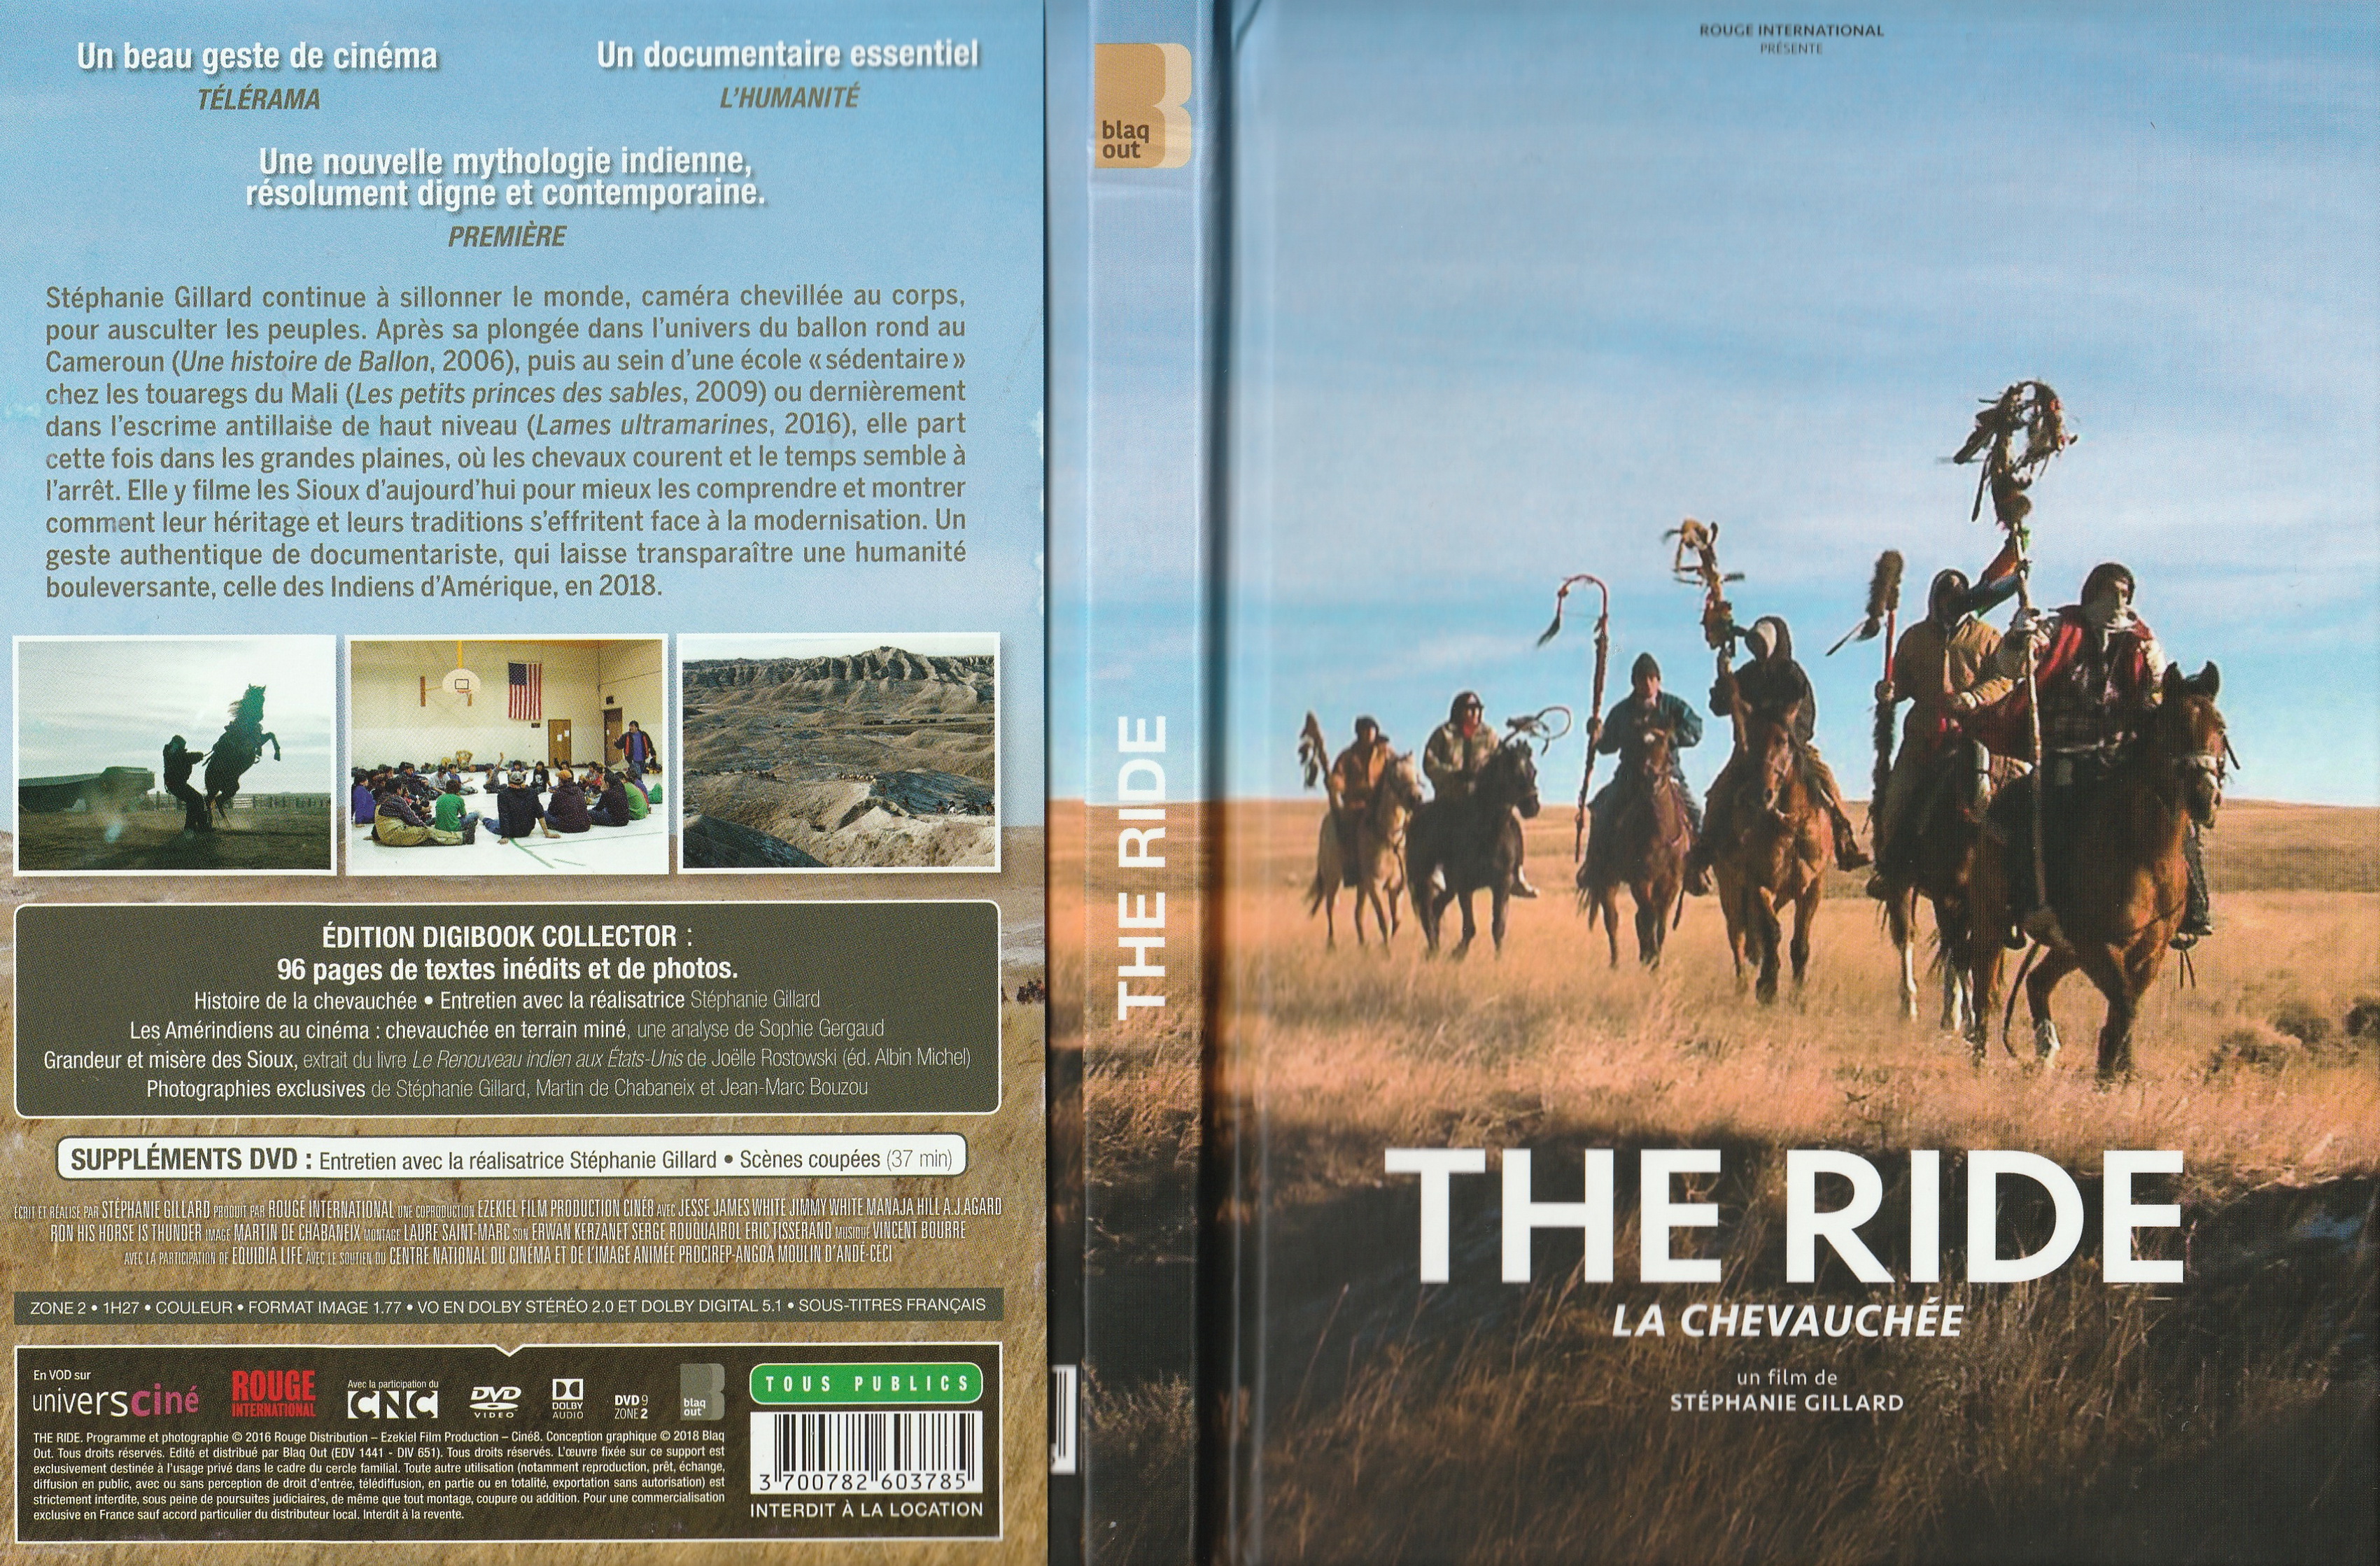 Jaquette DVD The ride